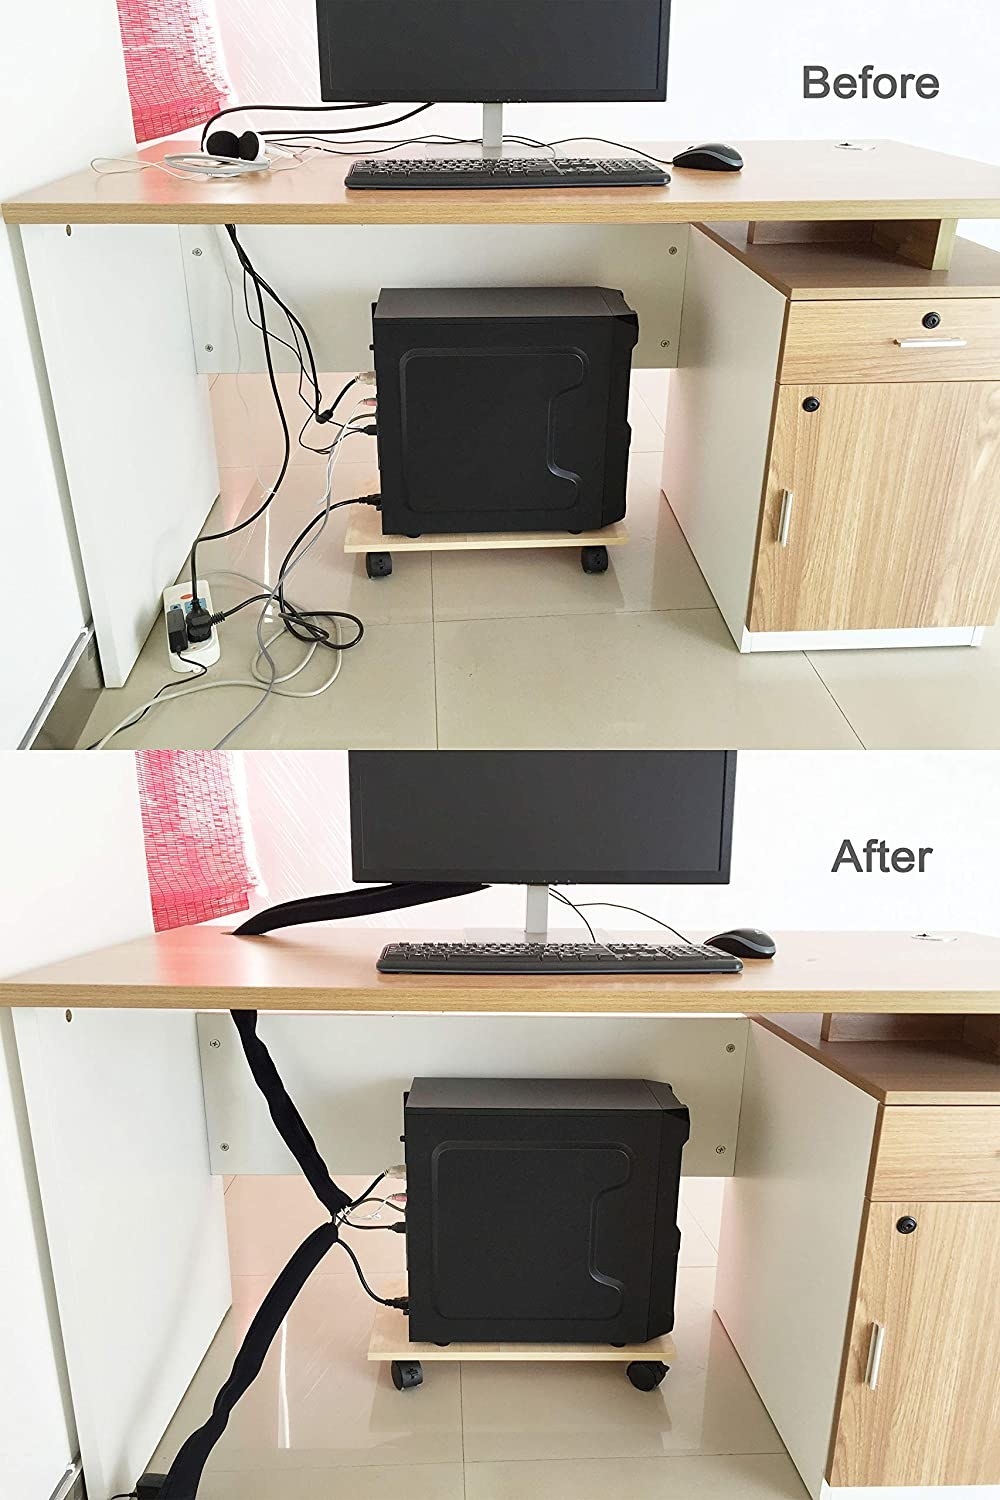 Before and after image of black cable management sleeves organizing cords from a computer tower